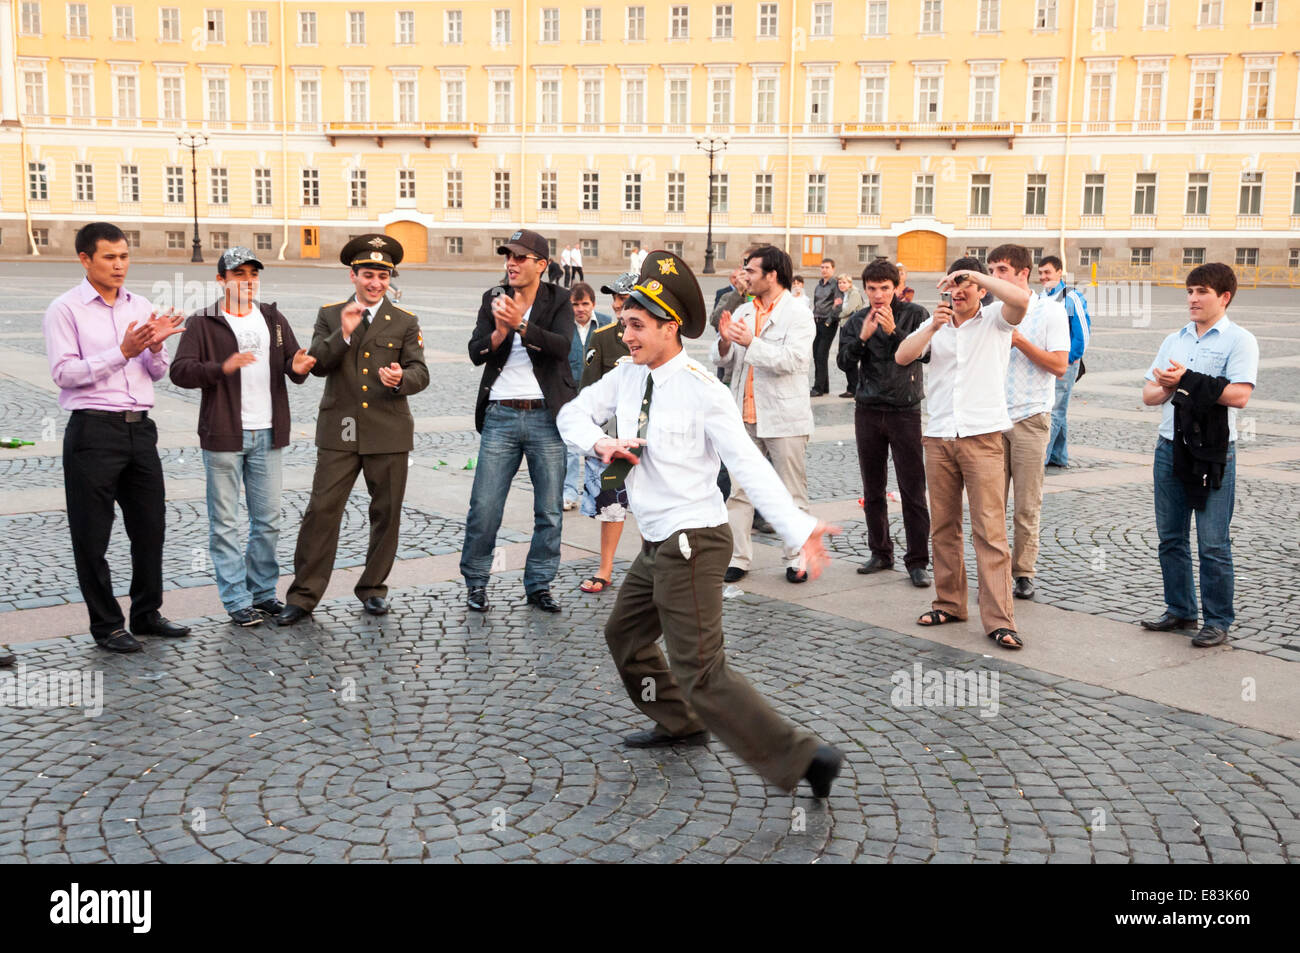 Drunk off duty army officer dancing in Dvortsovaya Ploshchad on one of the White Nights, St Petersburg, Russia Stock Photo